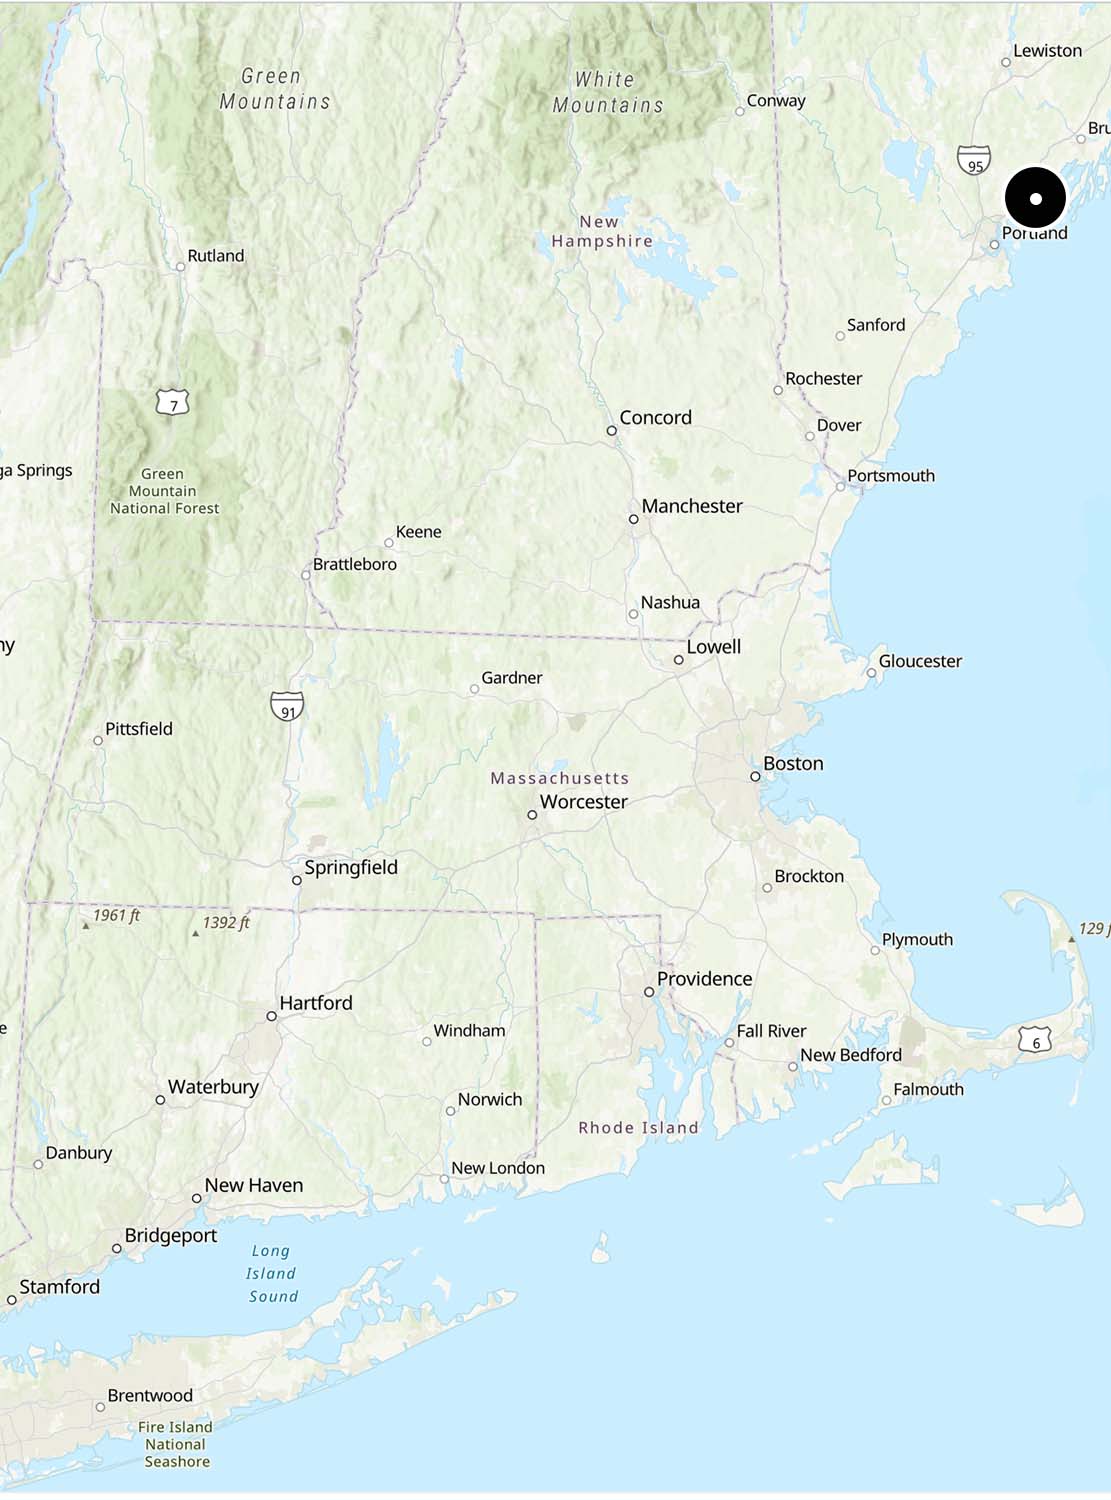 Map showing New England with a dot marking the location of Maquoit Bay, Maine.